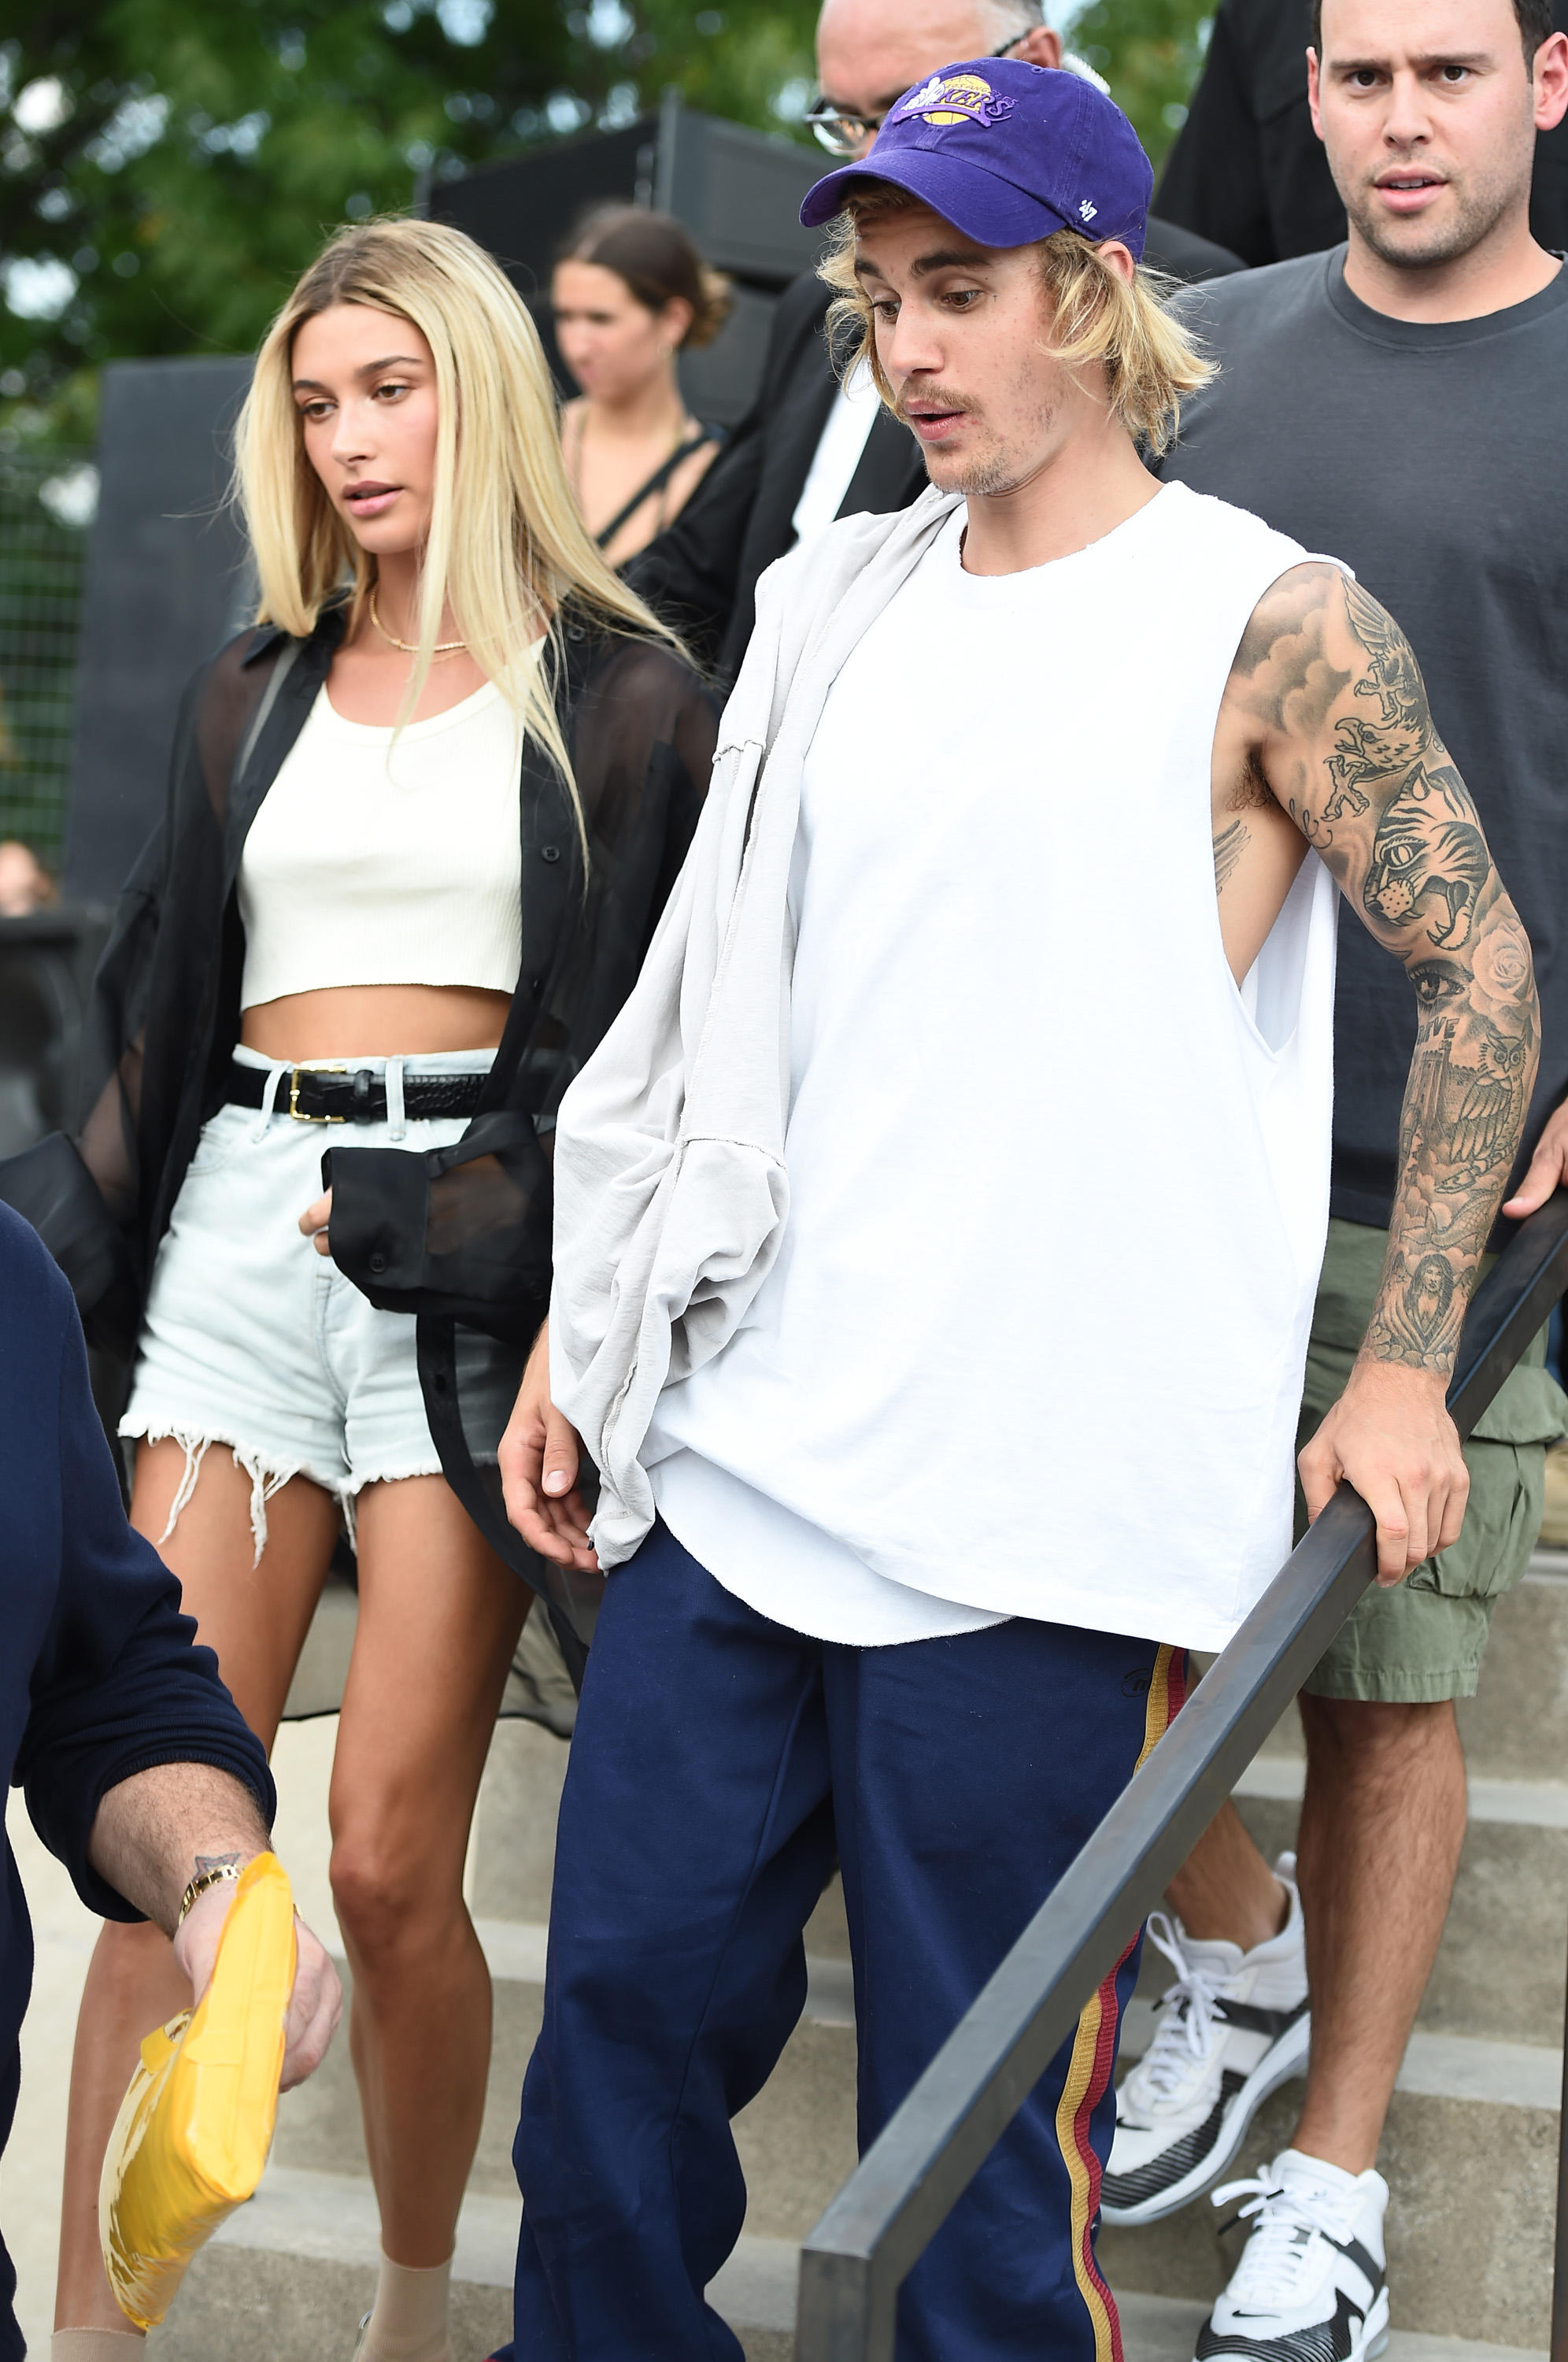 Justin Bieber and Hailey Baldwin reportedly tied the knot in September - CBS News